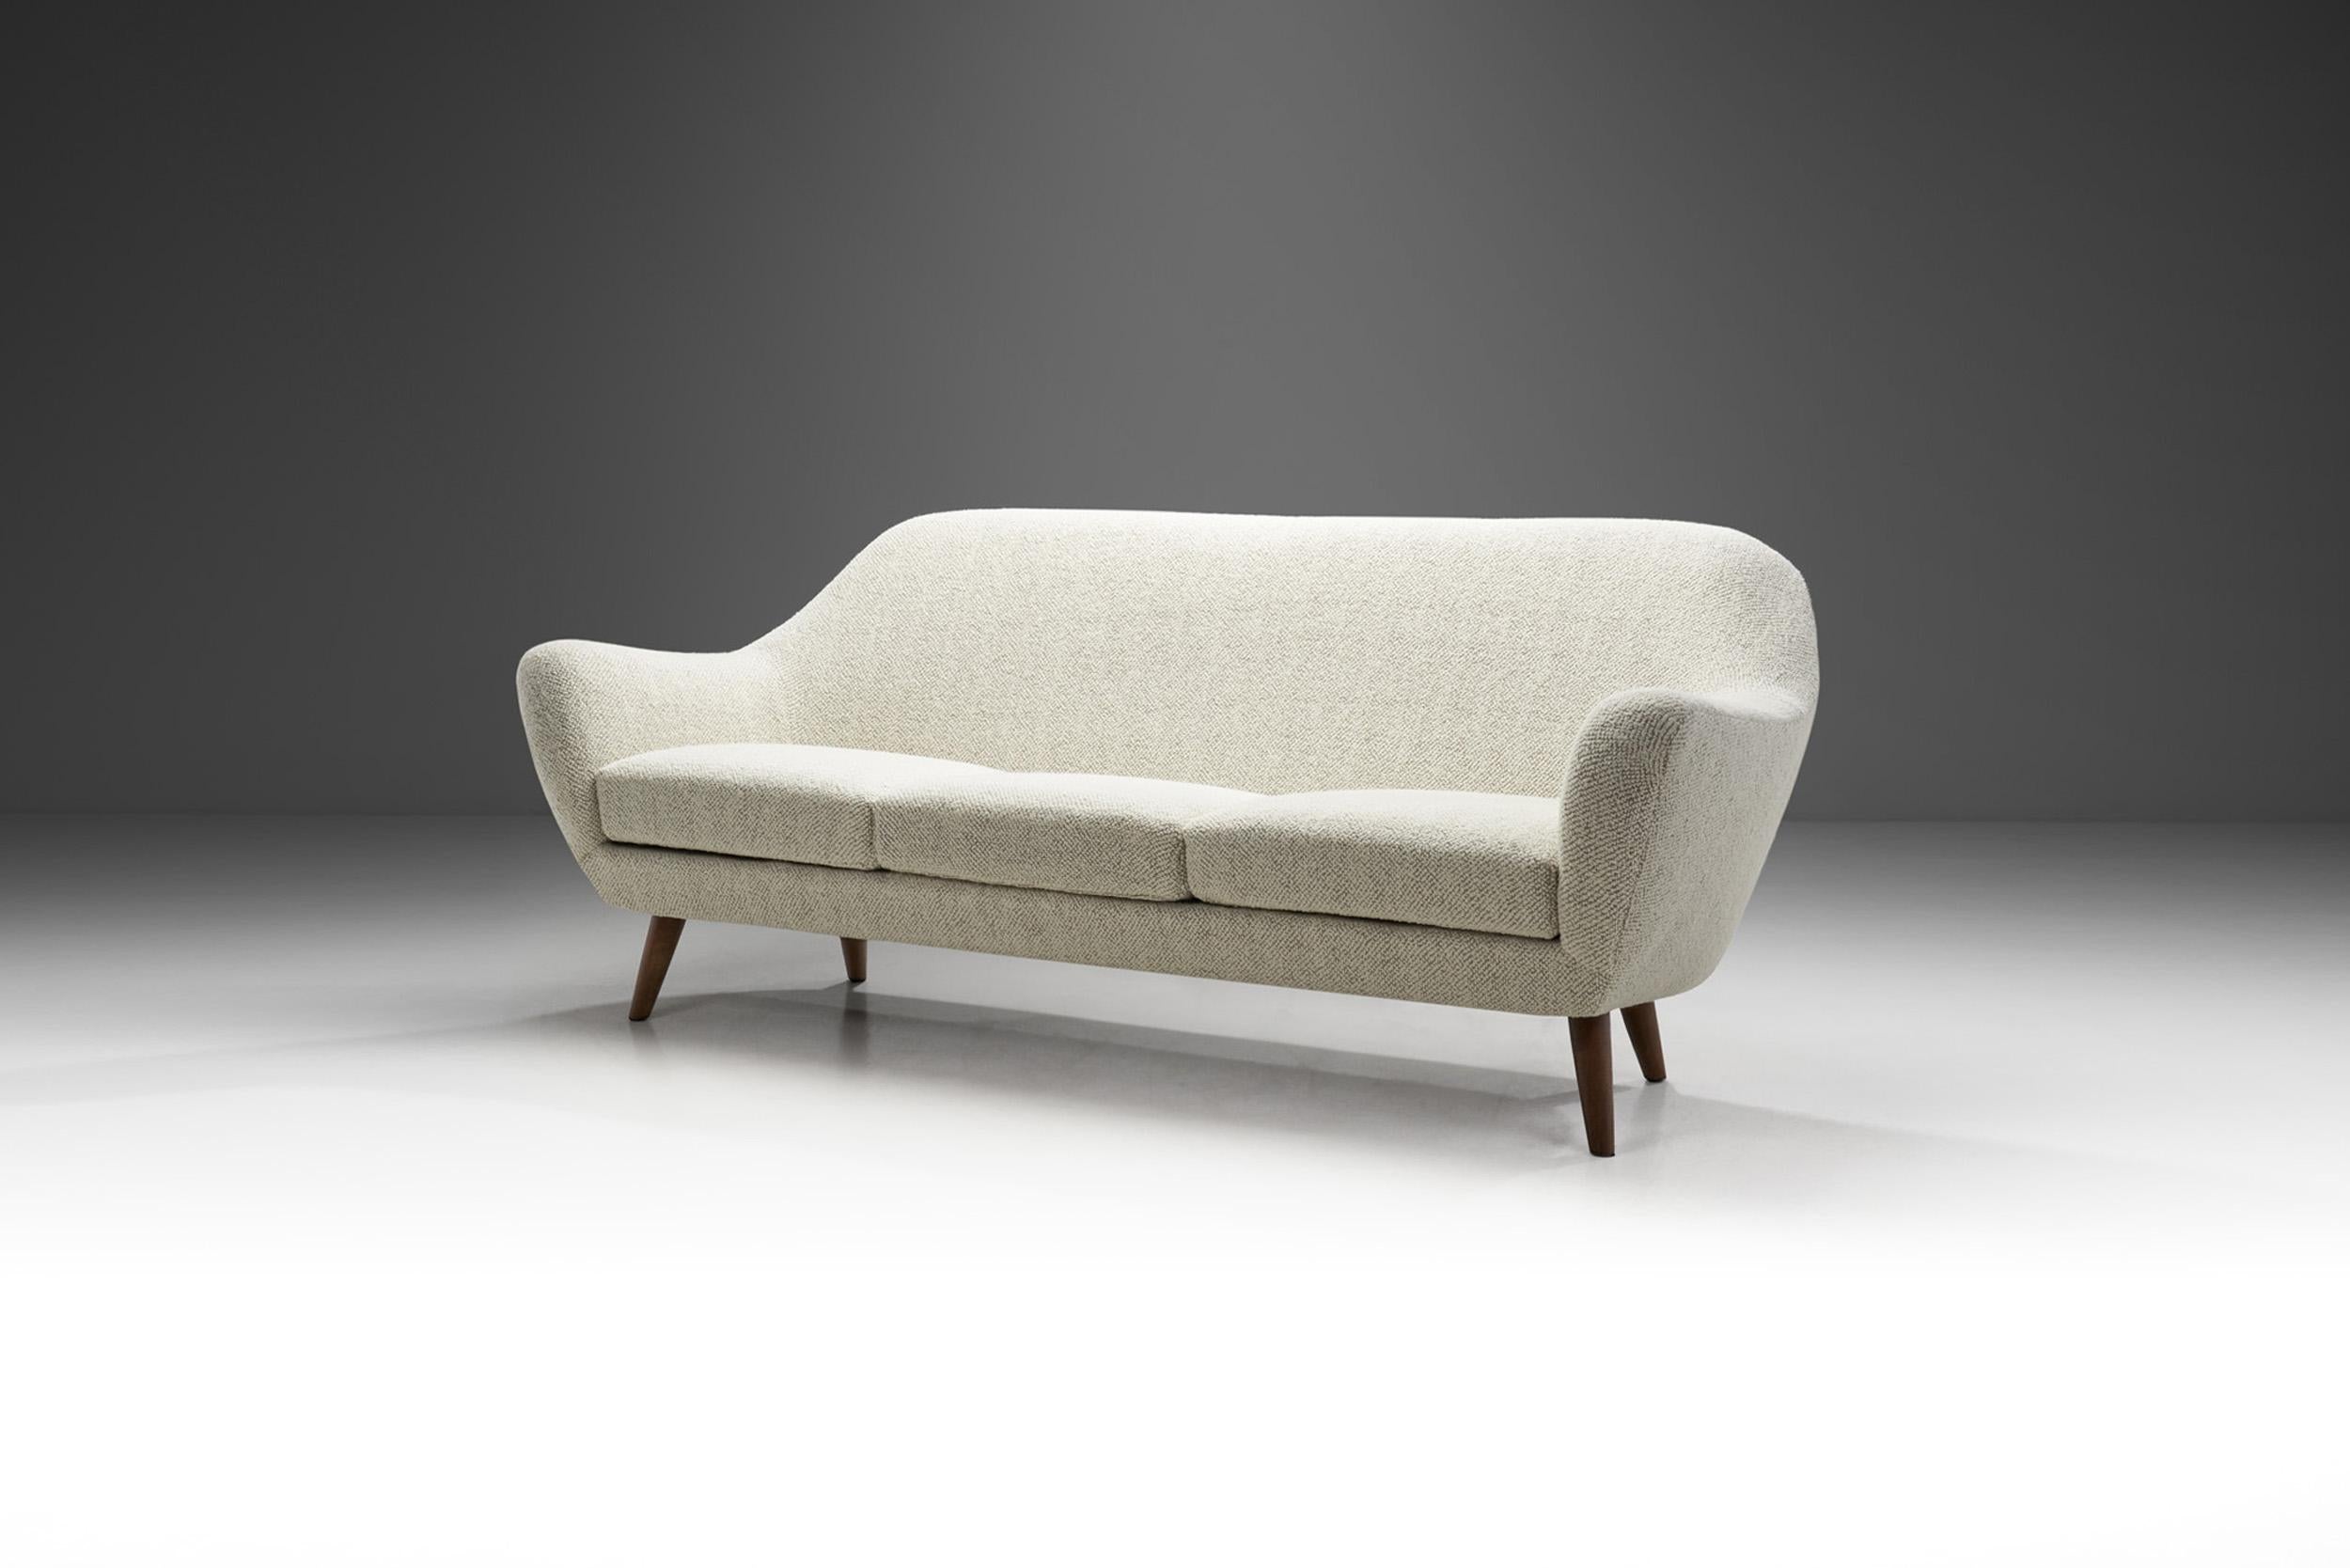 This pleasantly elegant sofa - together with an armchair - is from the “Chile” series by Swedish designer, Svante Skogh. His seating designs are exceedingly rare, especially the “Chile” series, making this sofa all the more special from a design